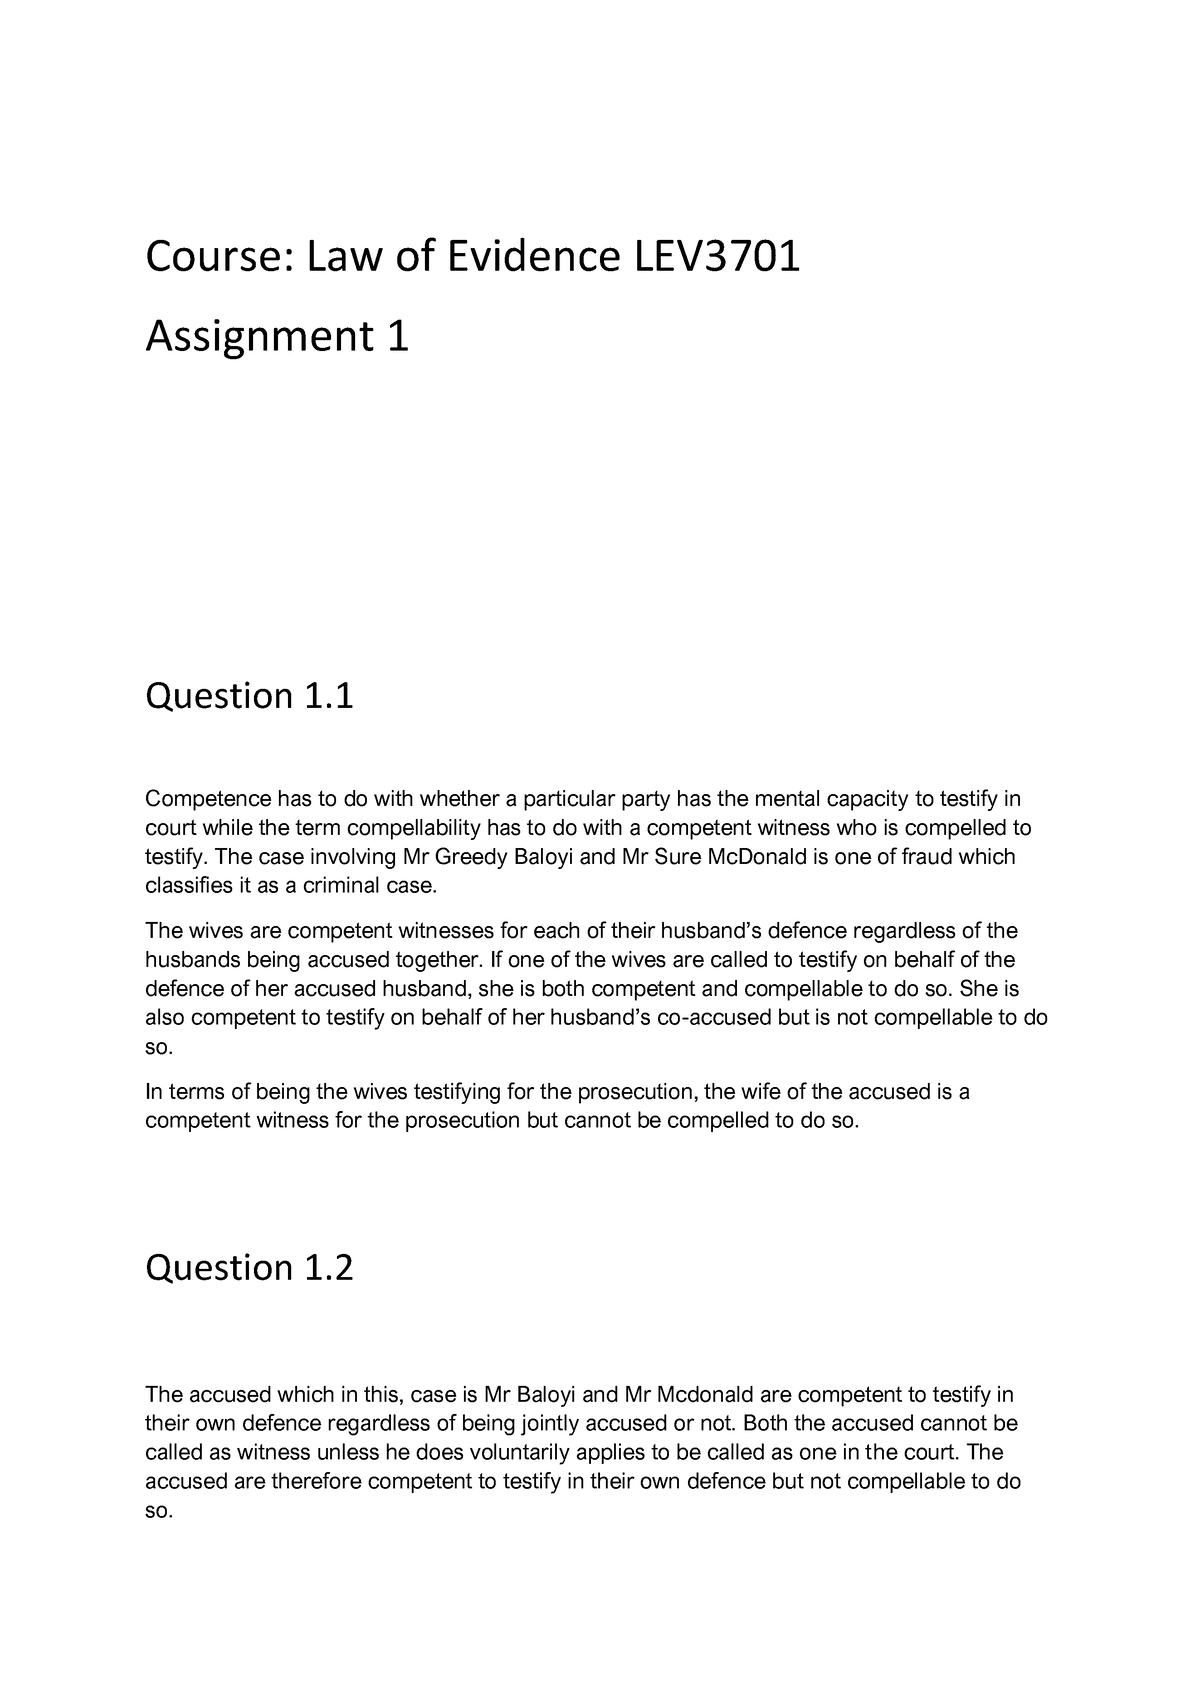 law of evidence assignment 1 2022